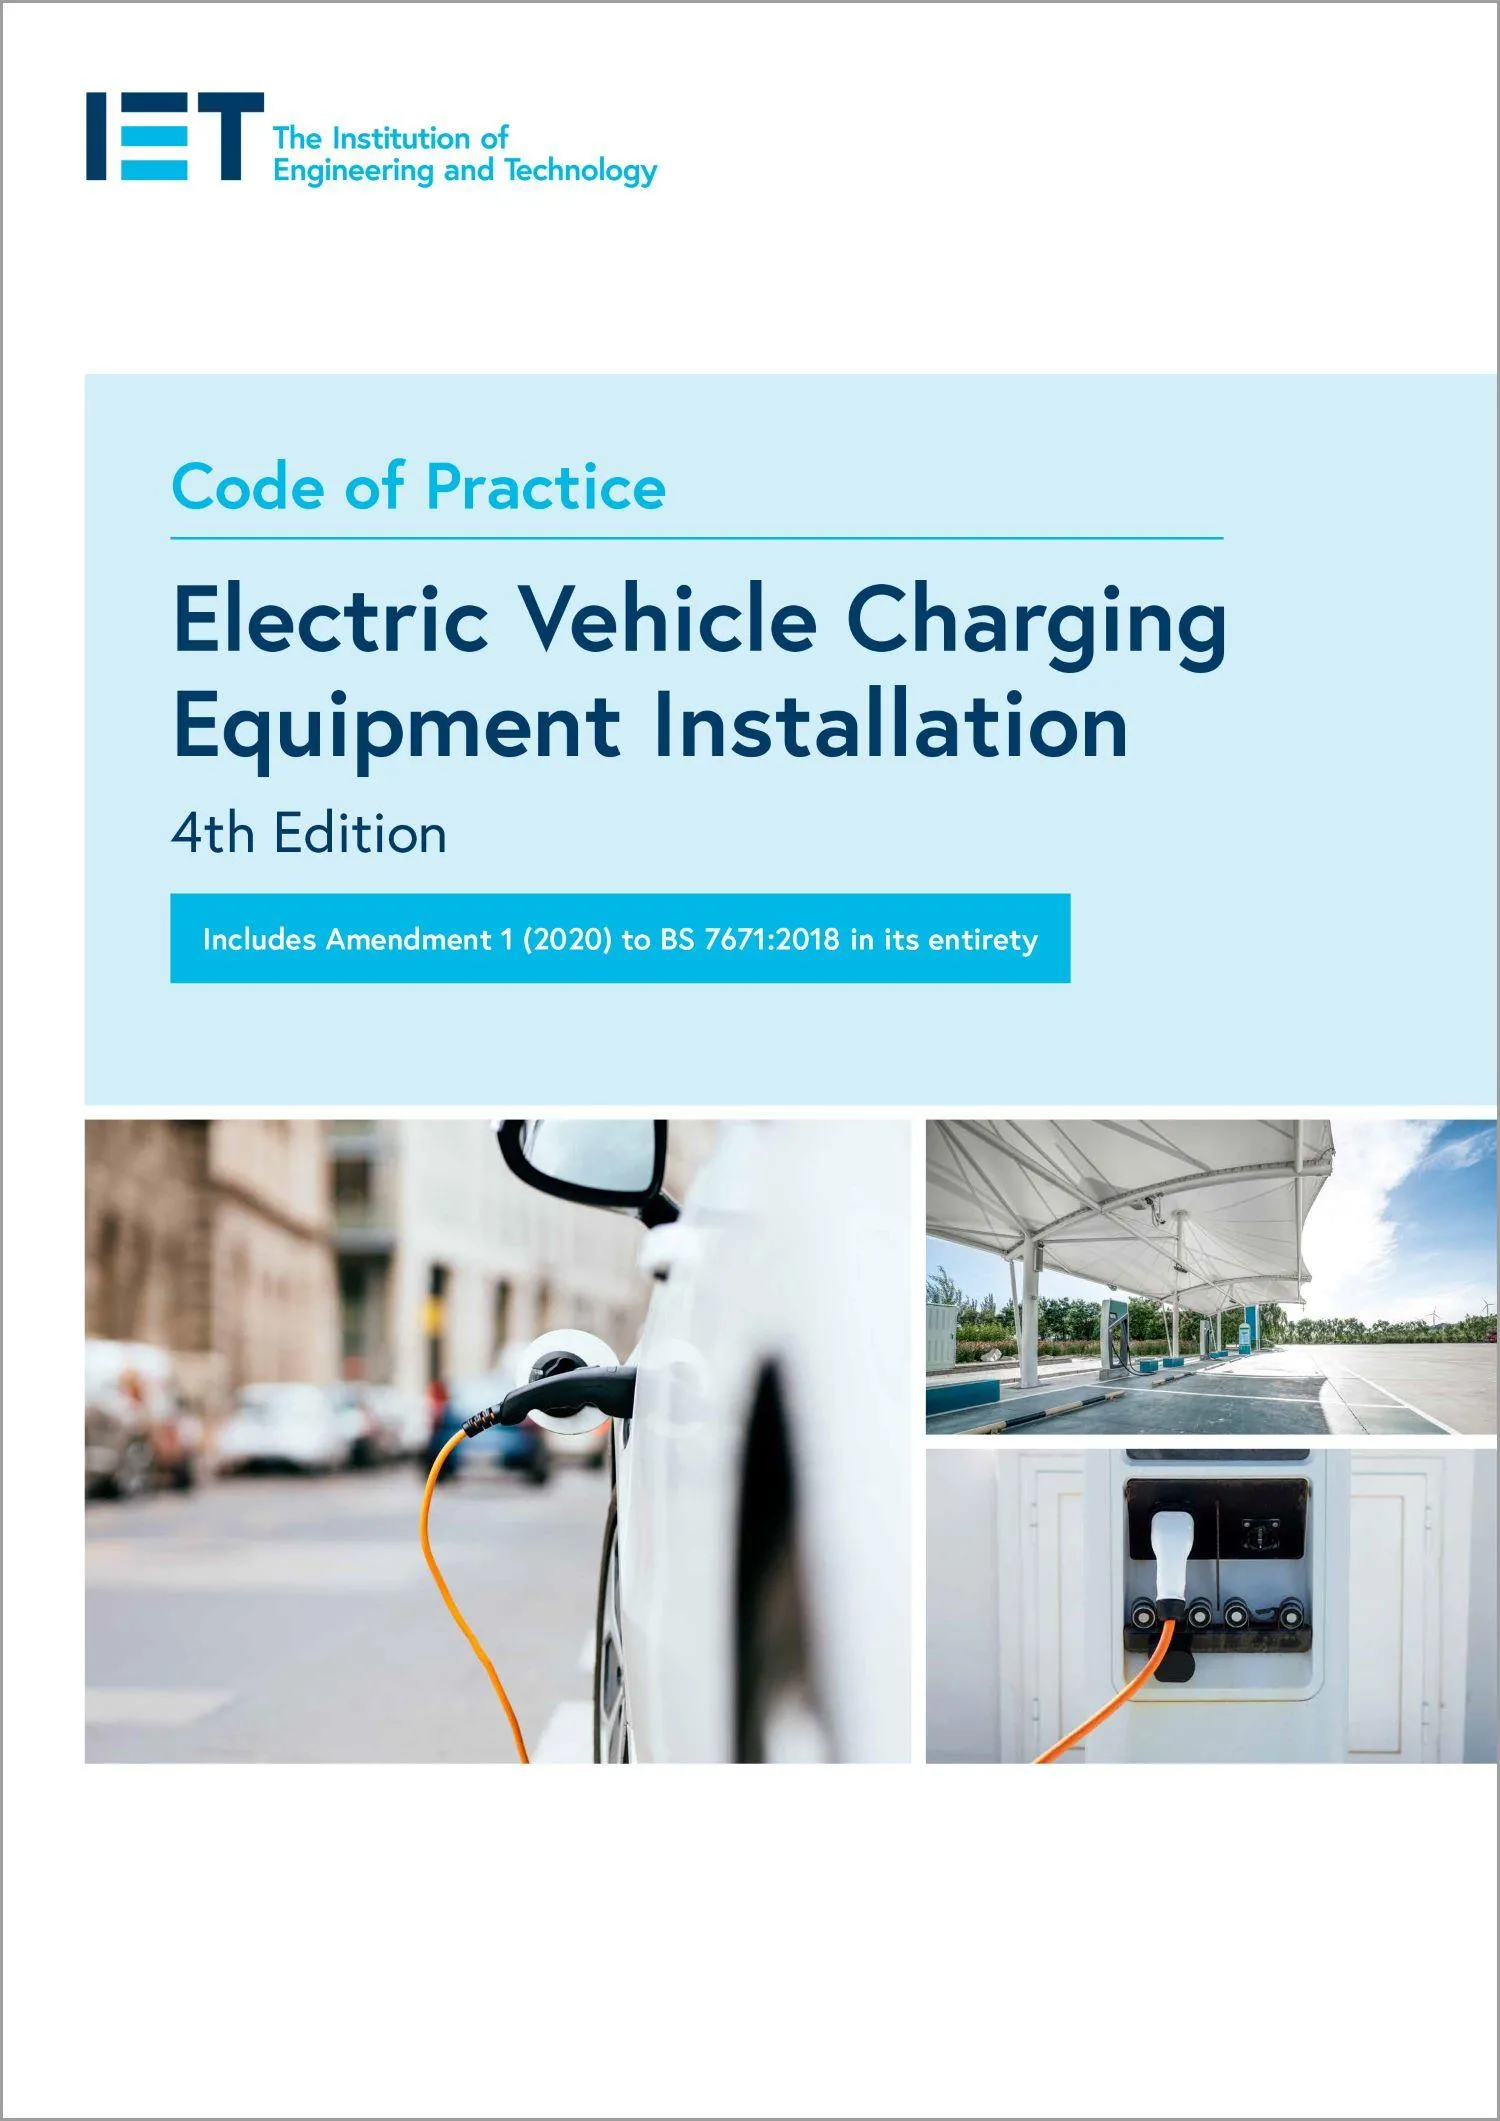 Electric Vehicle Charging Equipment Installation